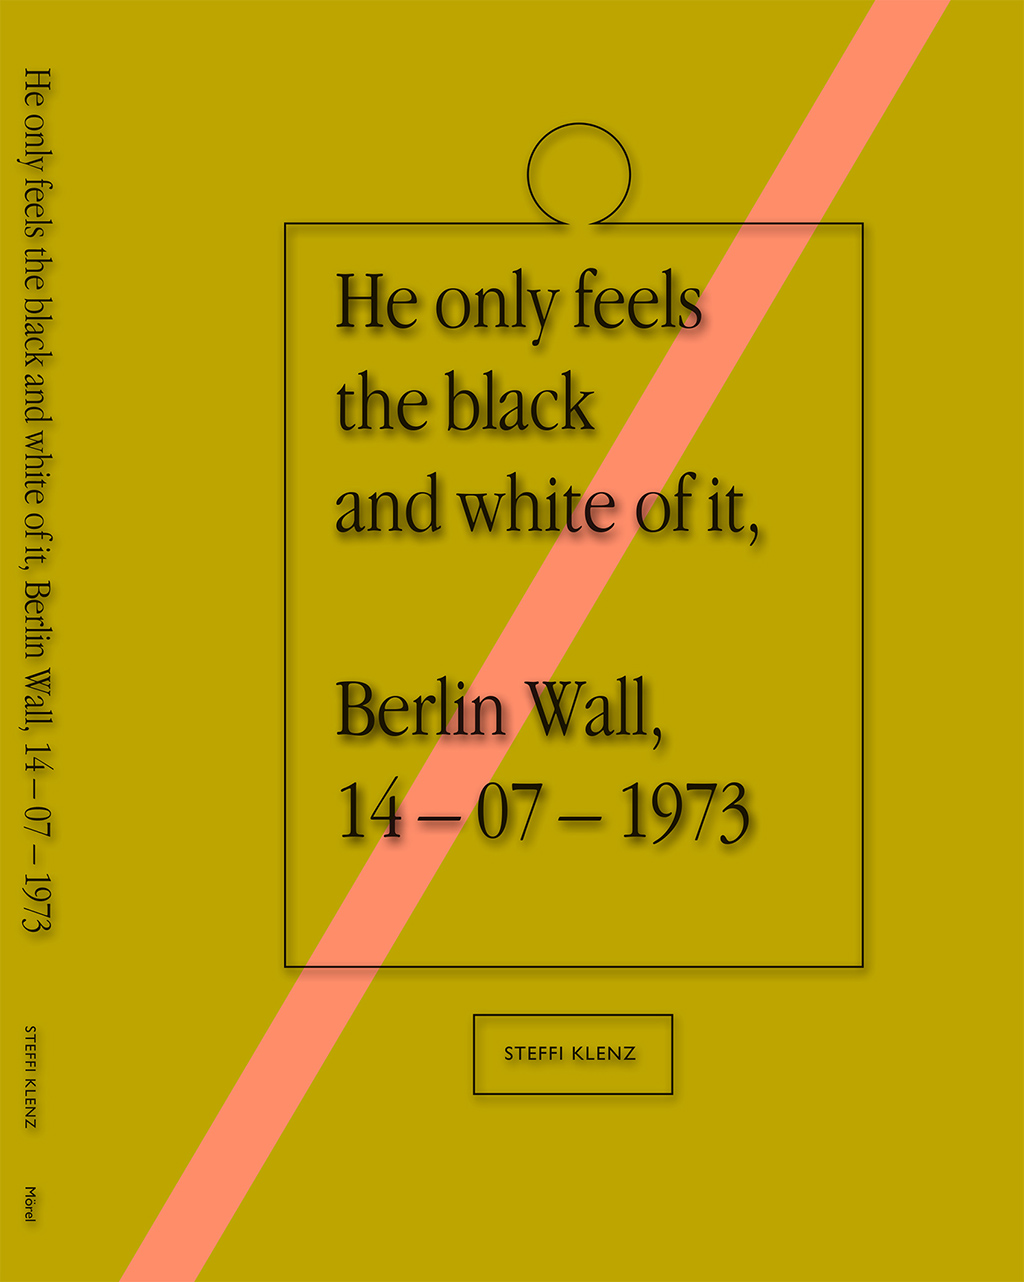 "I design quite a few books and publications, mostly for the cultural sector. This is the cover of the artist book I designed in collaboration with artist Steffi Klenz. It’s a book centered around one Associate Press photograph of the Berlin Wall and daily life and tensions in a family in socialist East-Germany."